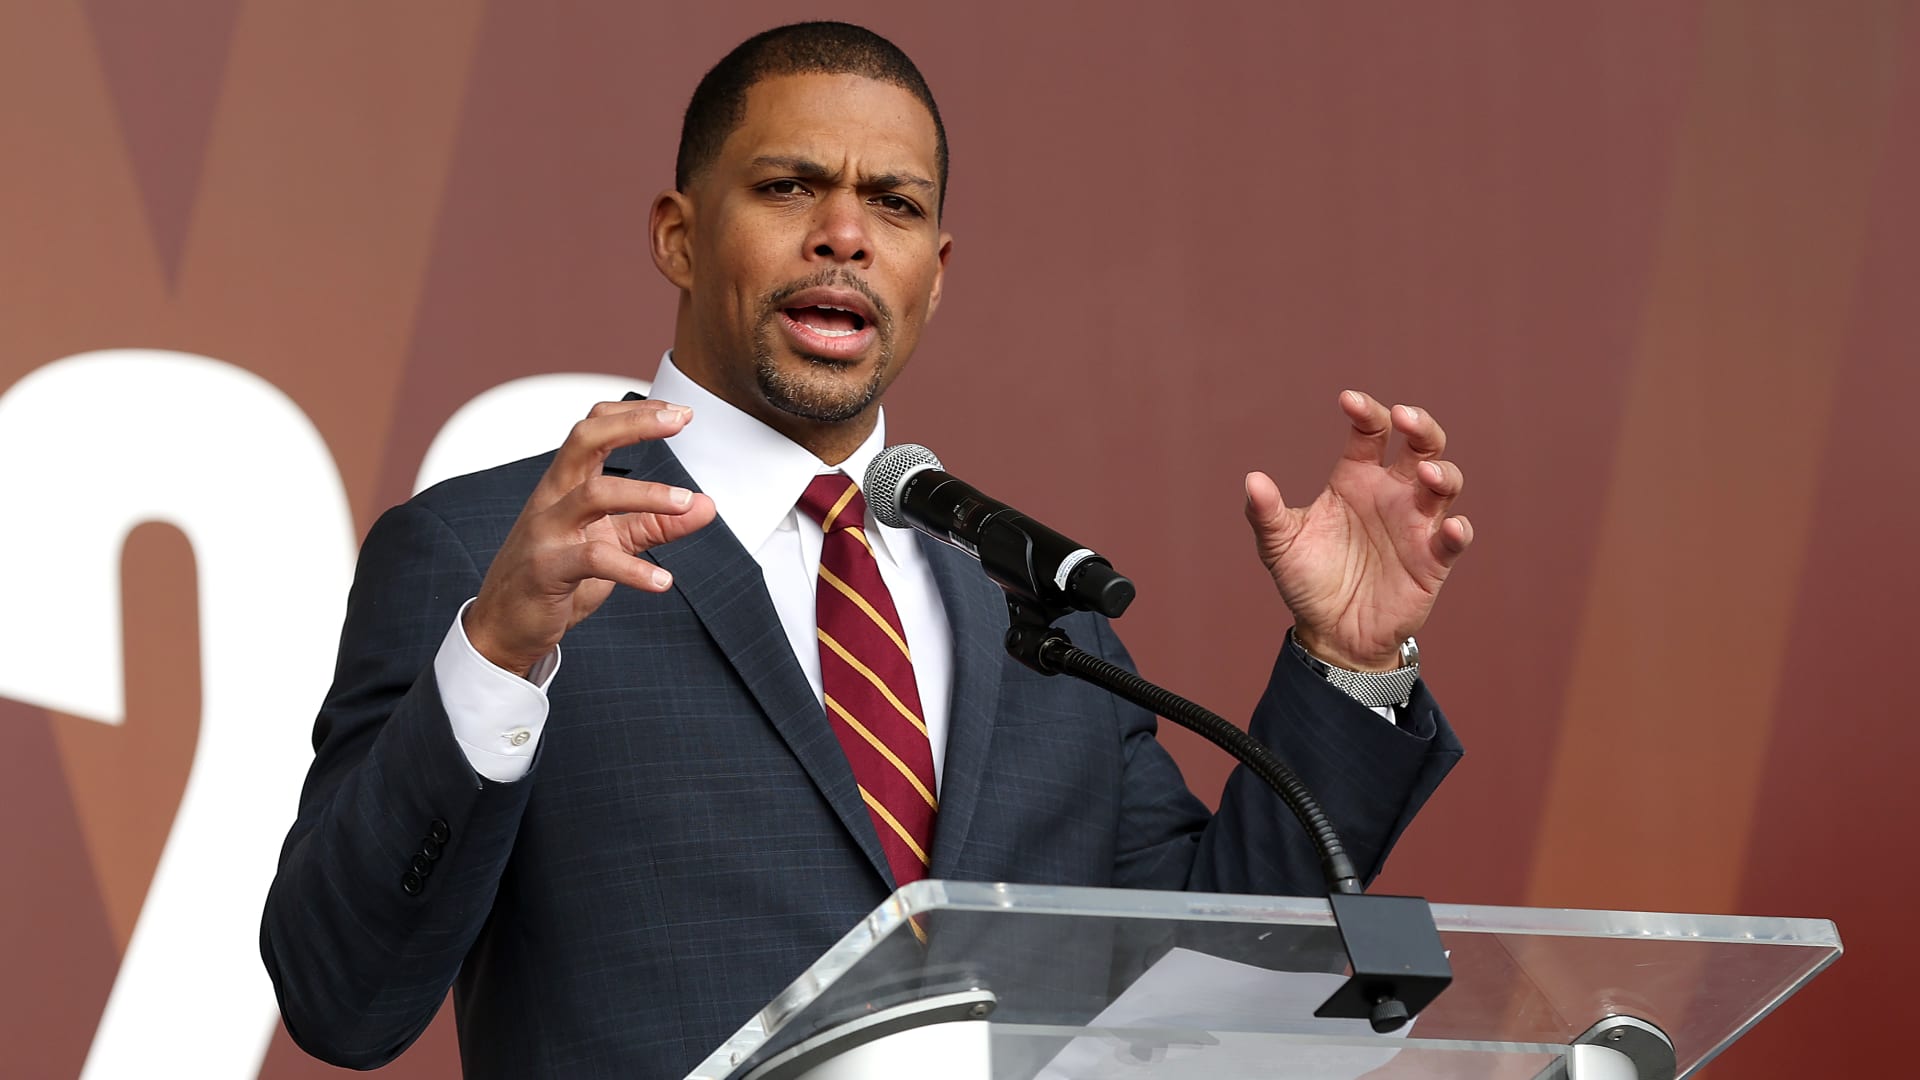 Team President Jason Wright speaks during the announcement of the Washington Football Team's name change to the Washington Commanders at FedExField on February 02, 2022 in Landover, Maryland.